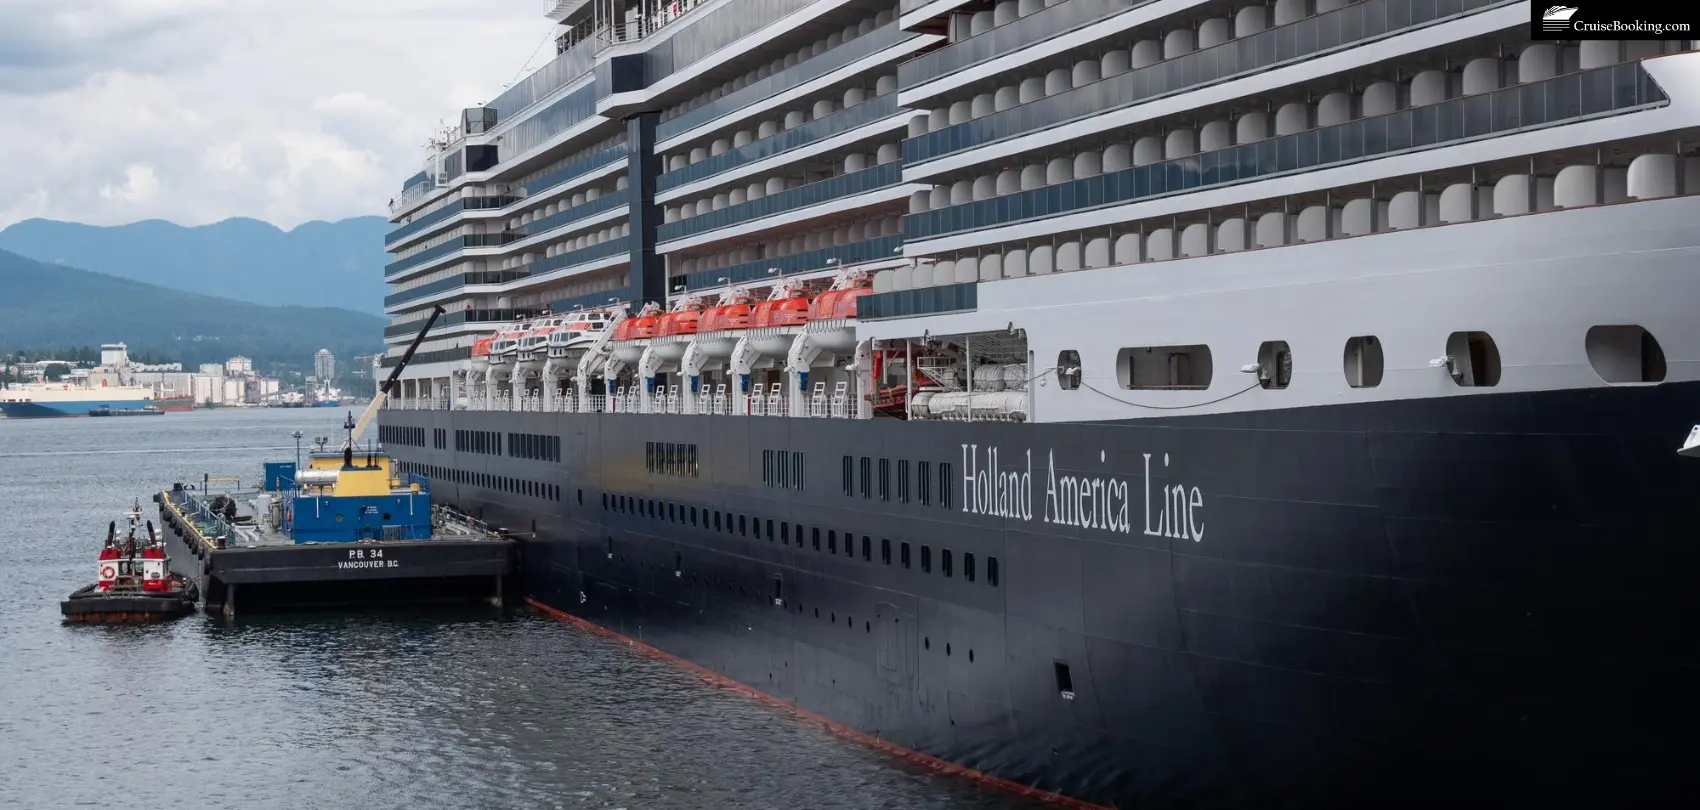 ‘Alaska Up Close’ Onboard Programming Expanded by Holland America Line